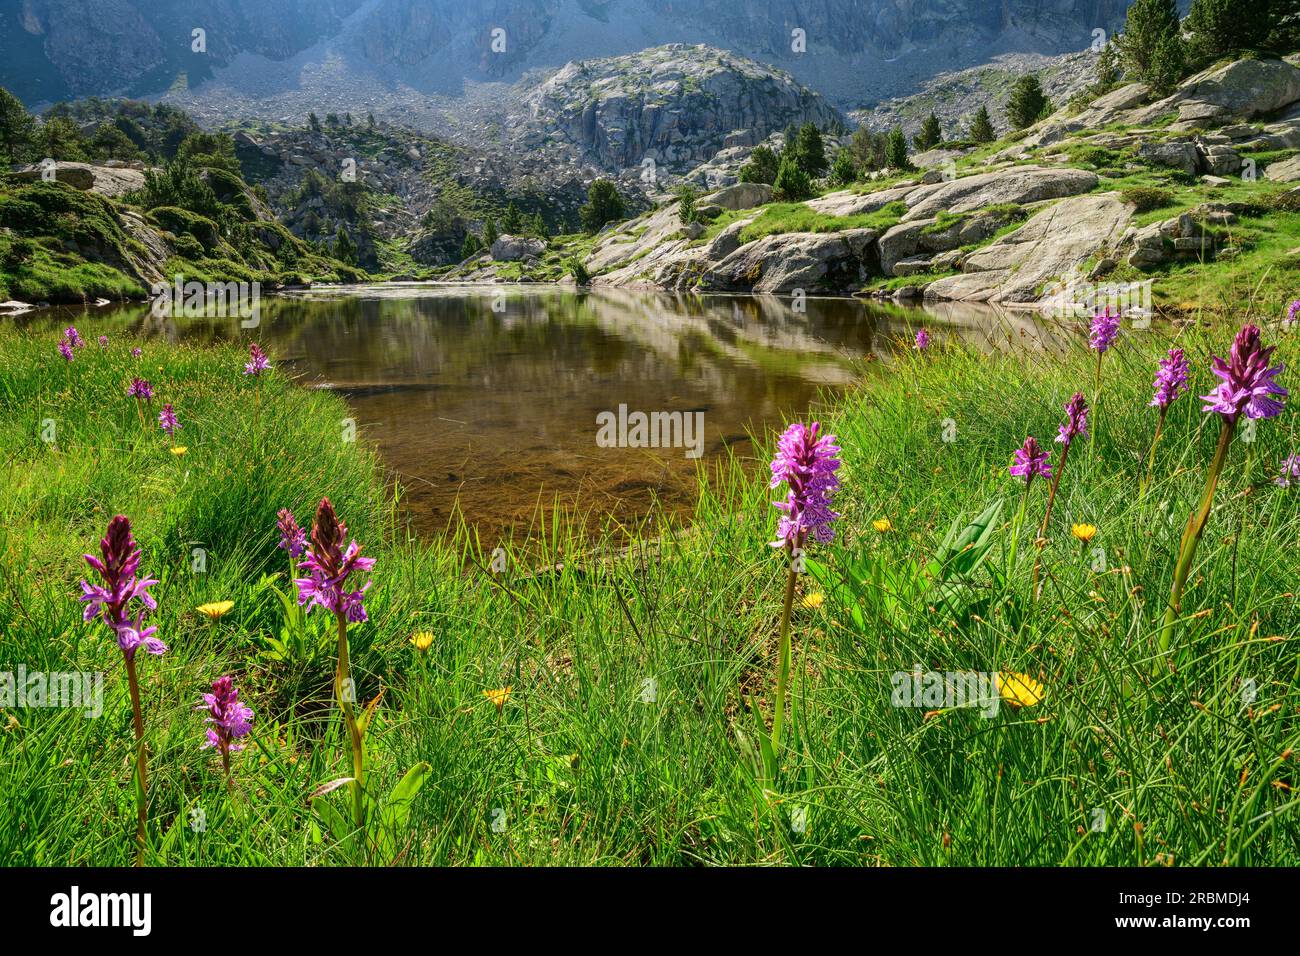 Flowering orchid in front of lake, Valle Gerber, Aigüestortes i Estany de Sant Maurici National Park, Pyrenees, Catalonia, Spain Stock Photo